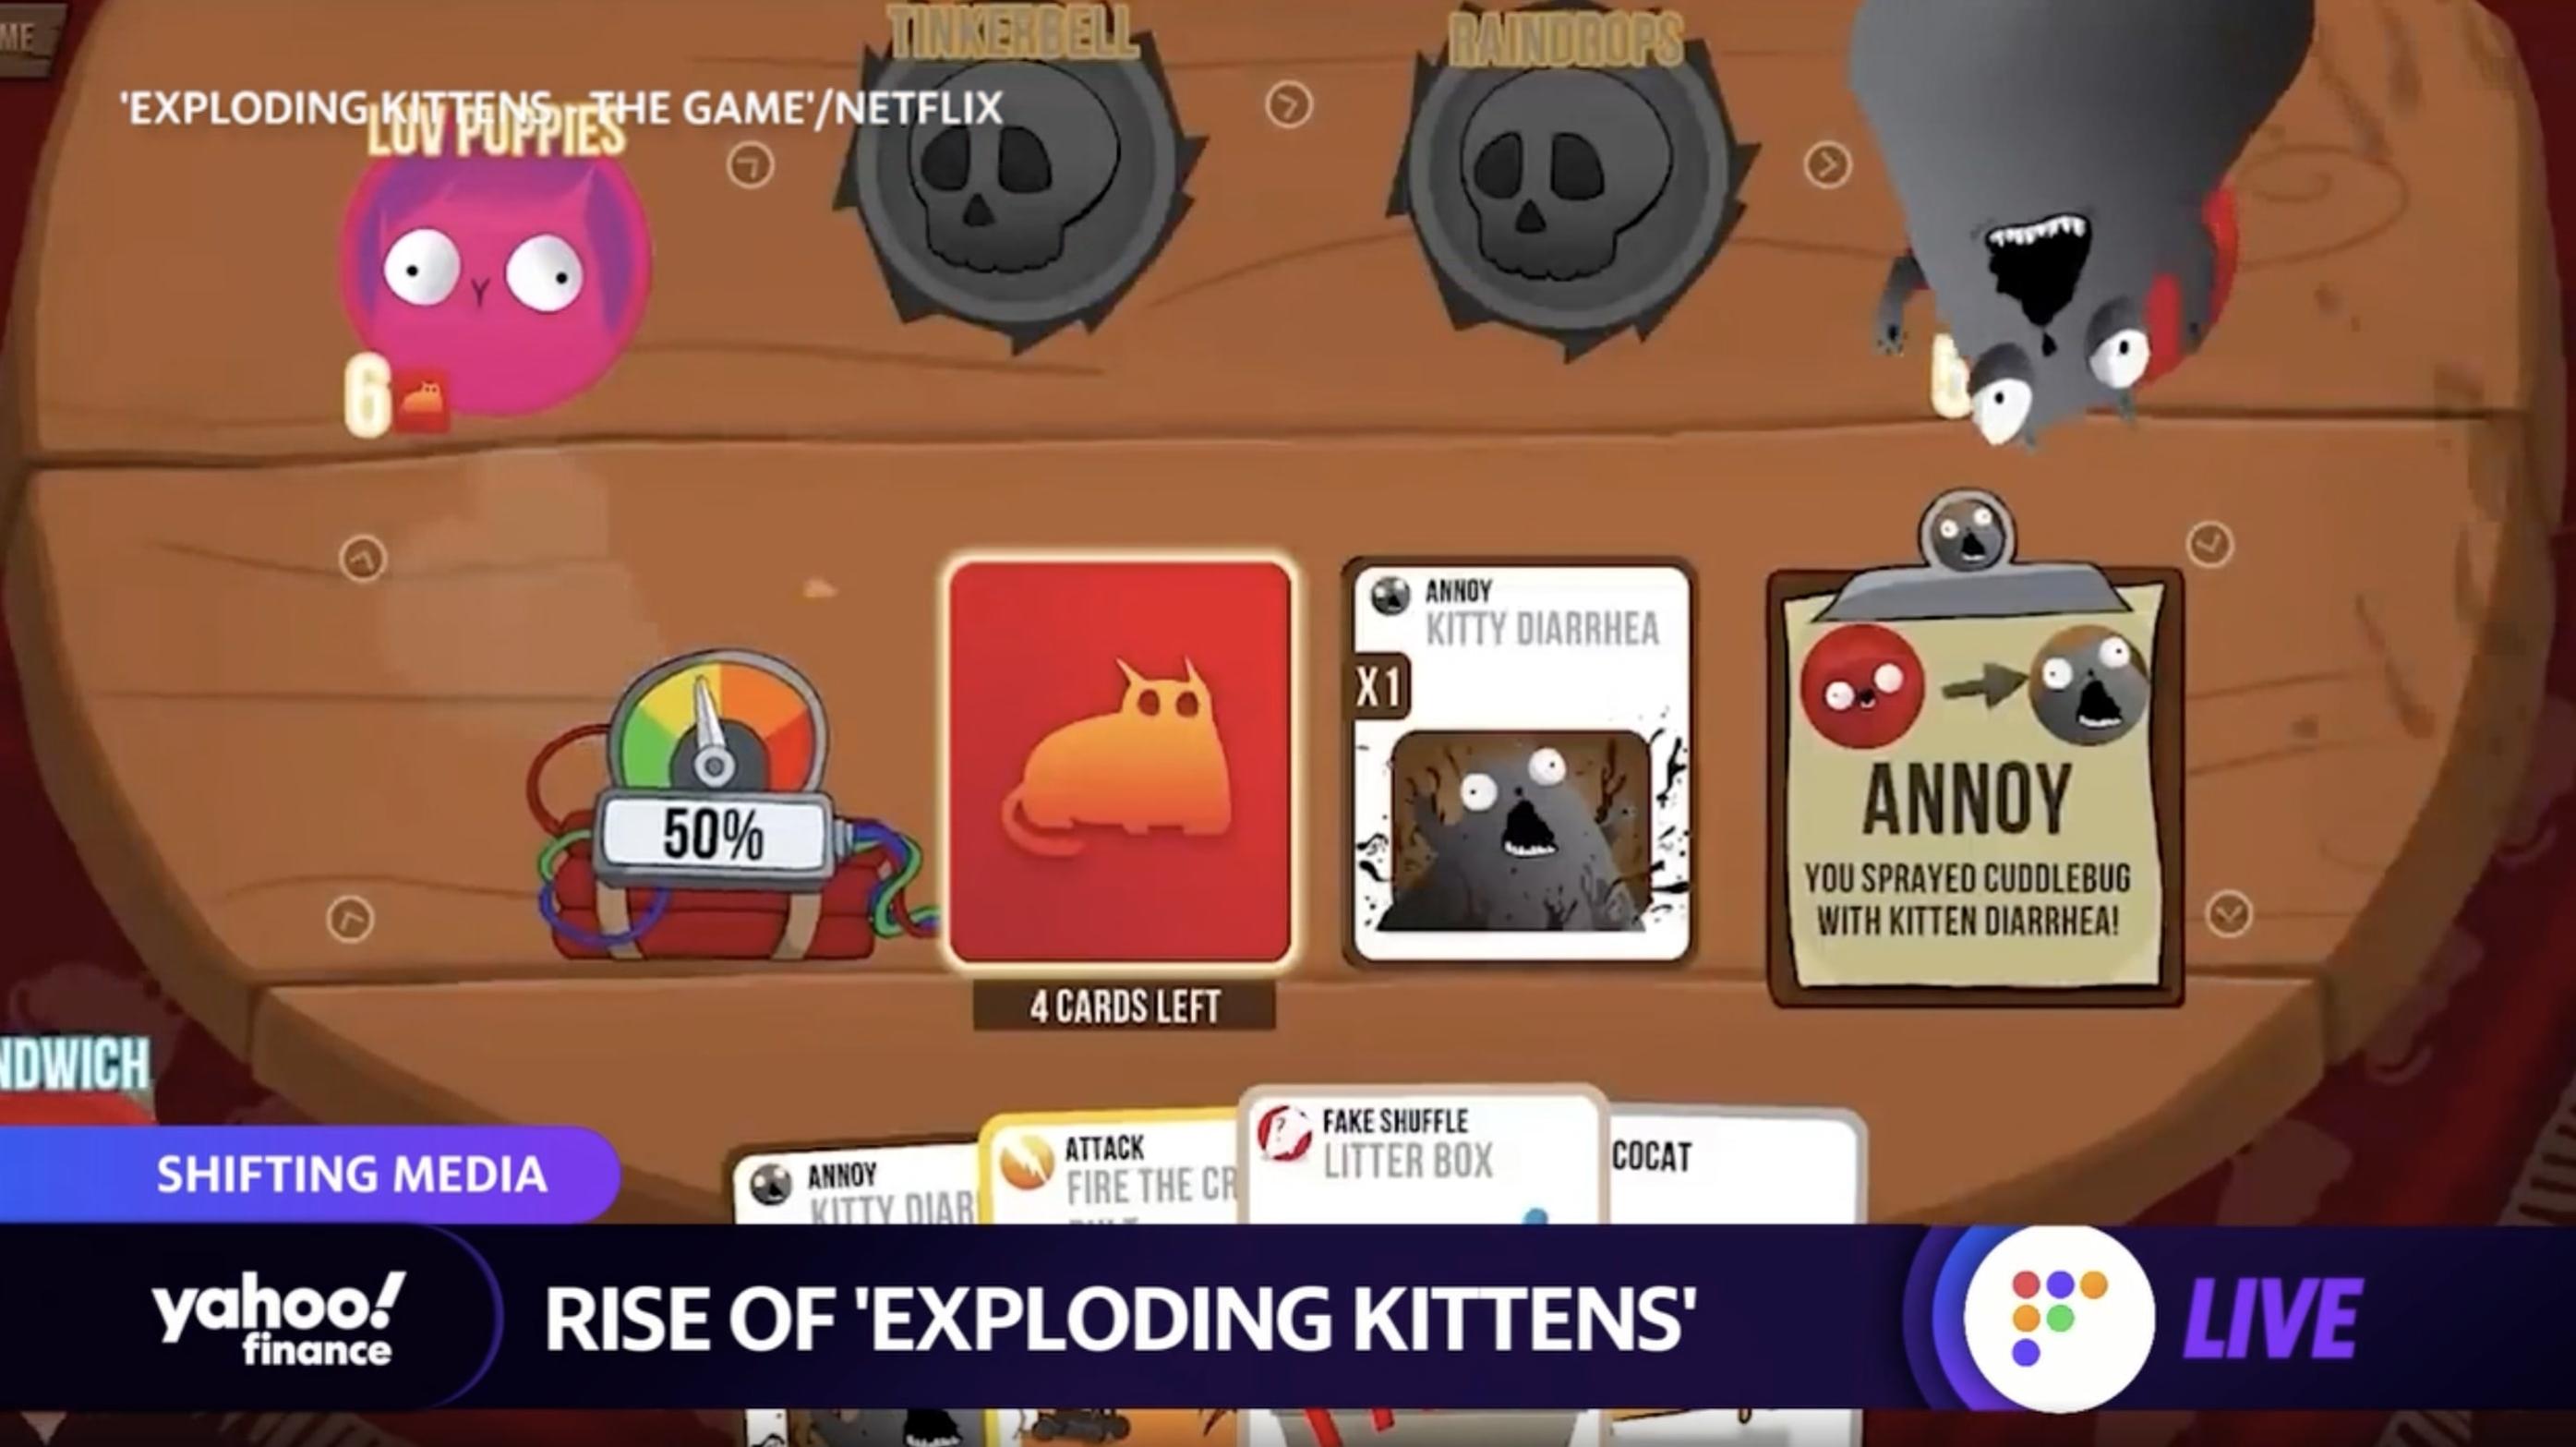 Netflix brings 'Exploding Kittens' to mobile devices, set to launch  animated series